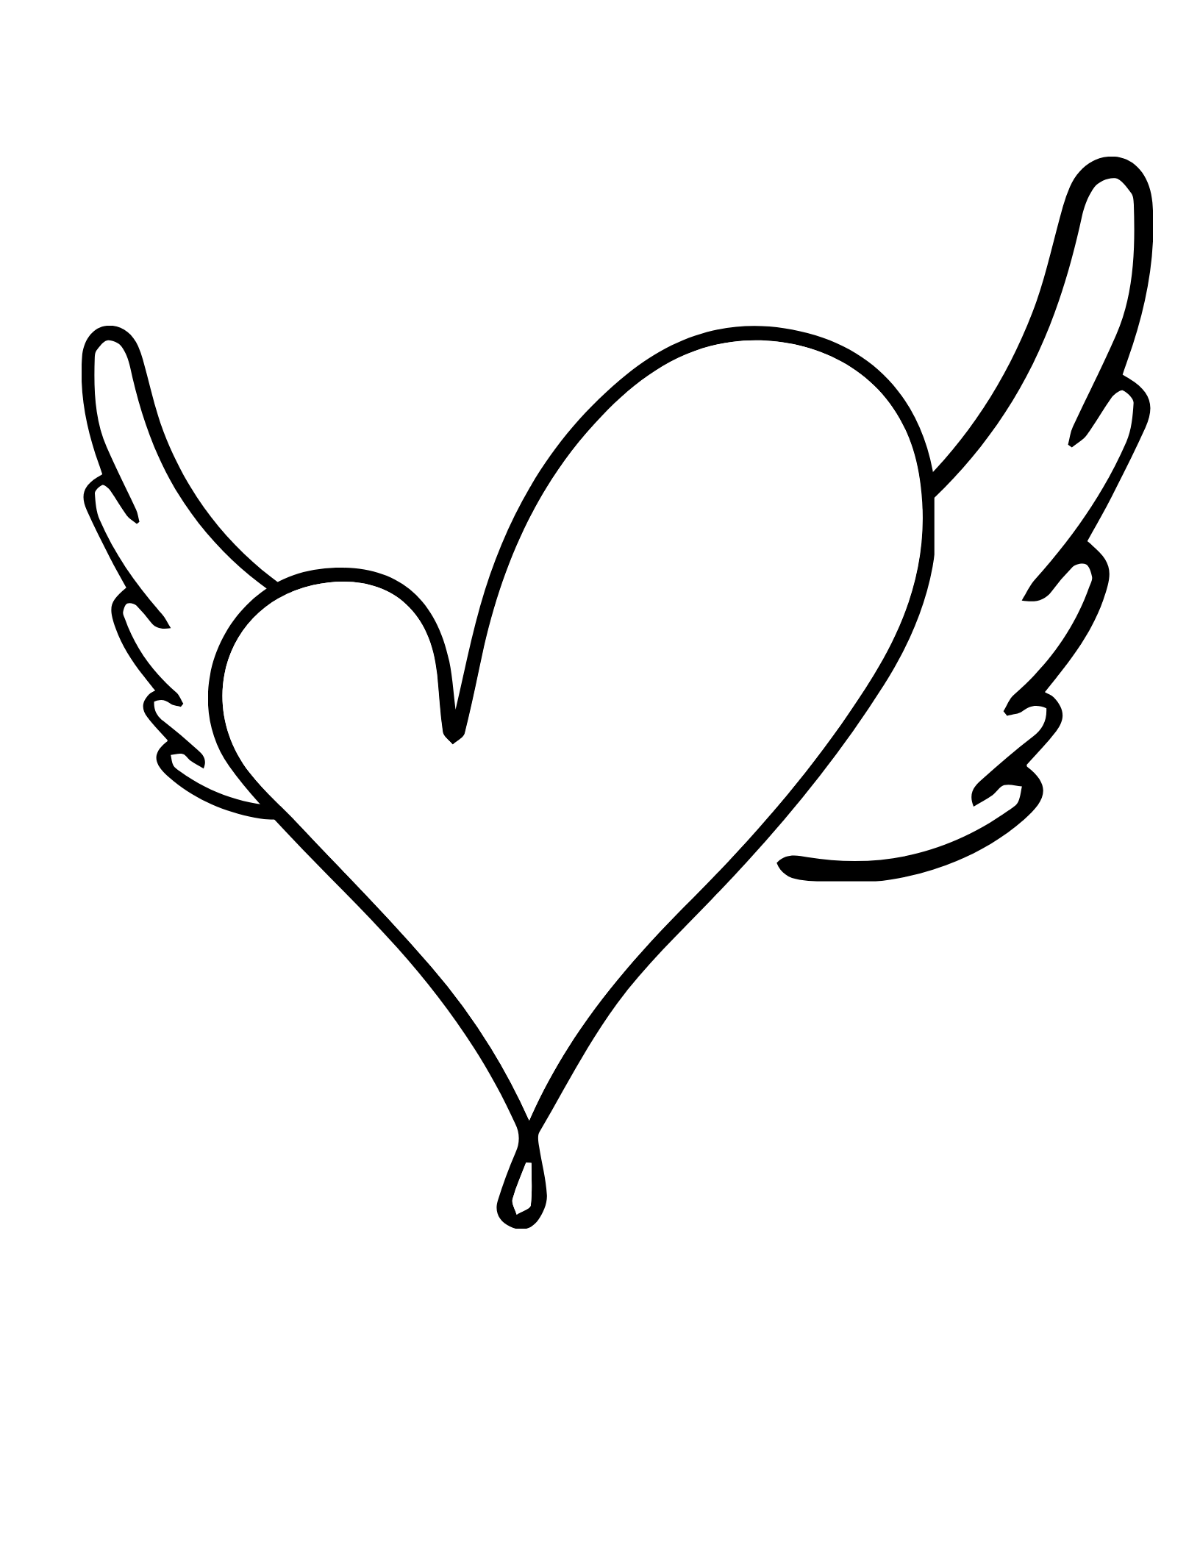 Heart Line Art Coloring Page Template